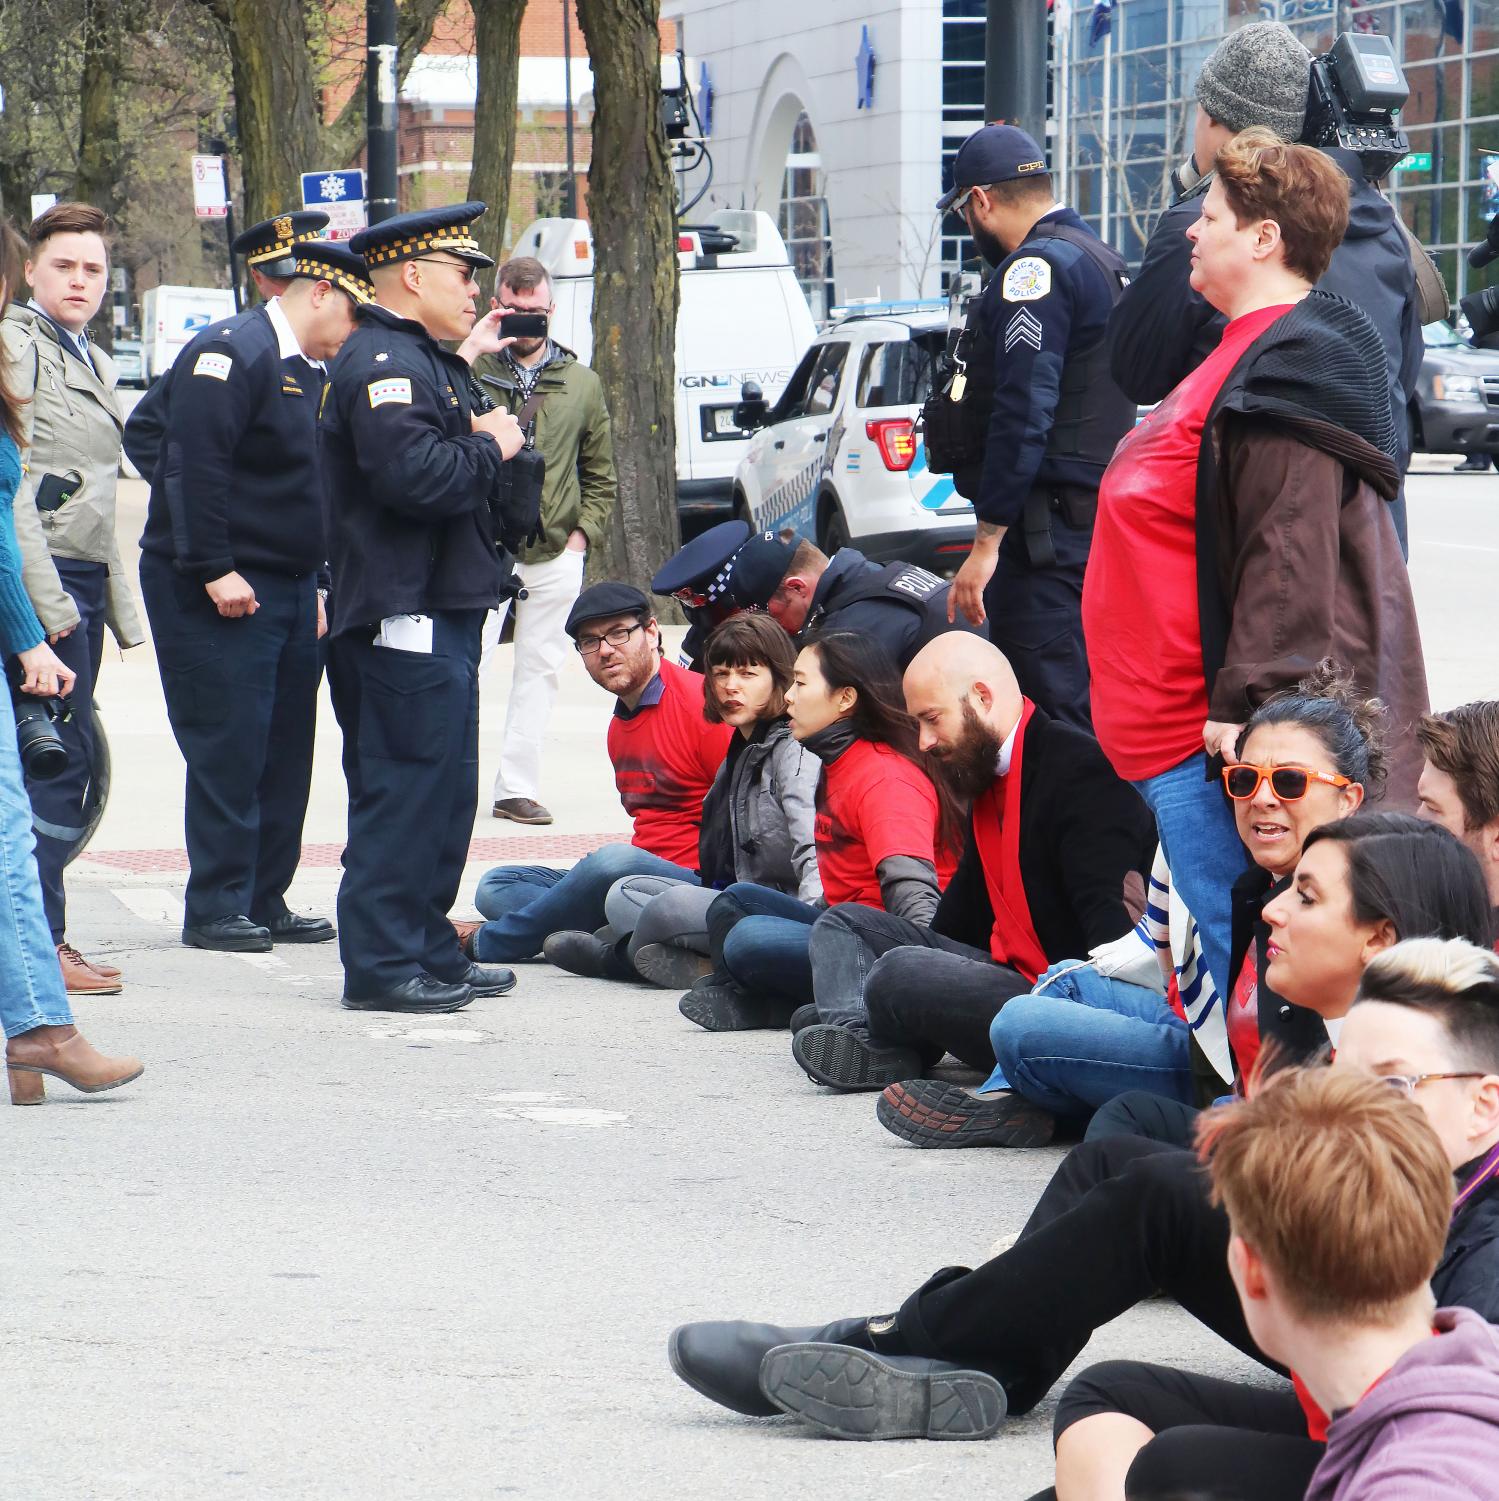 Protest+against+CPD+union+in+Near+West+Side+ends+in+12+arrests